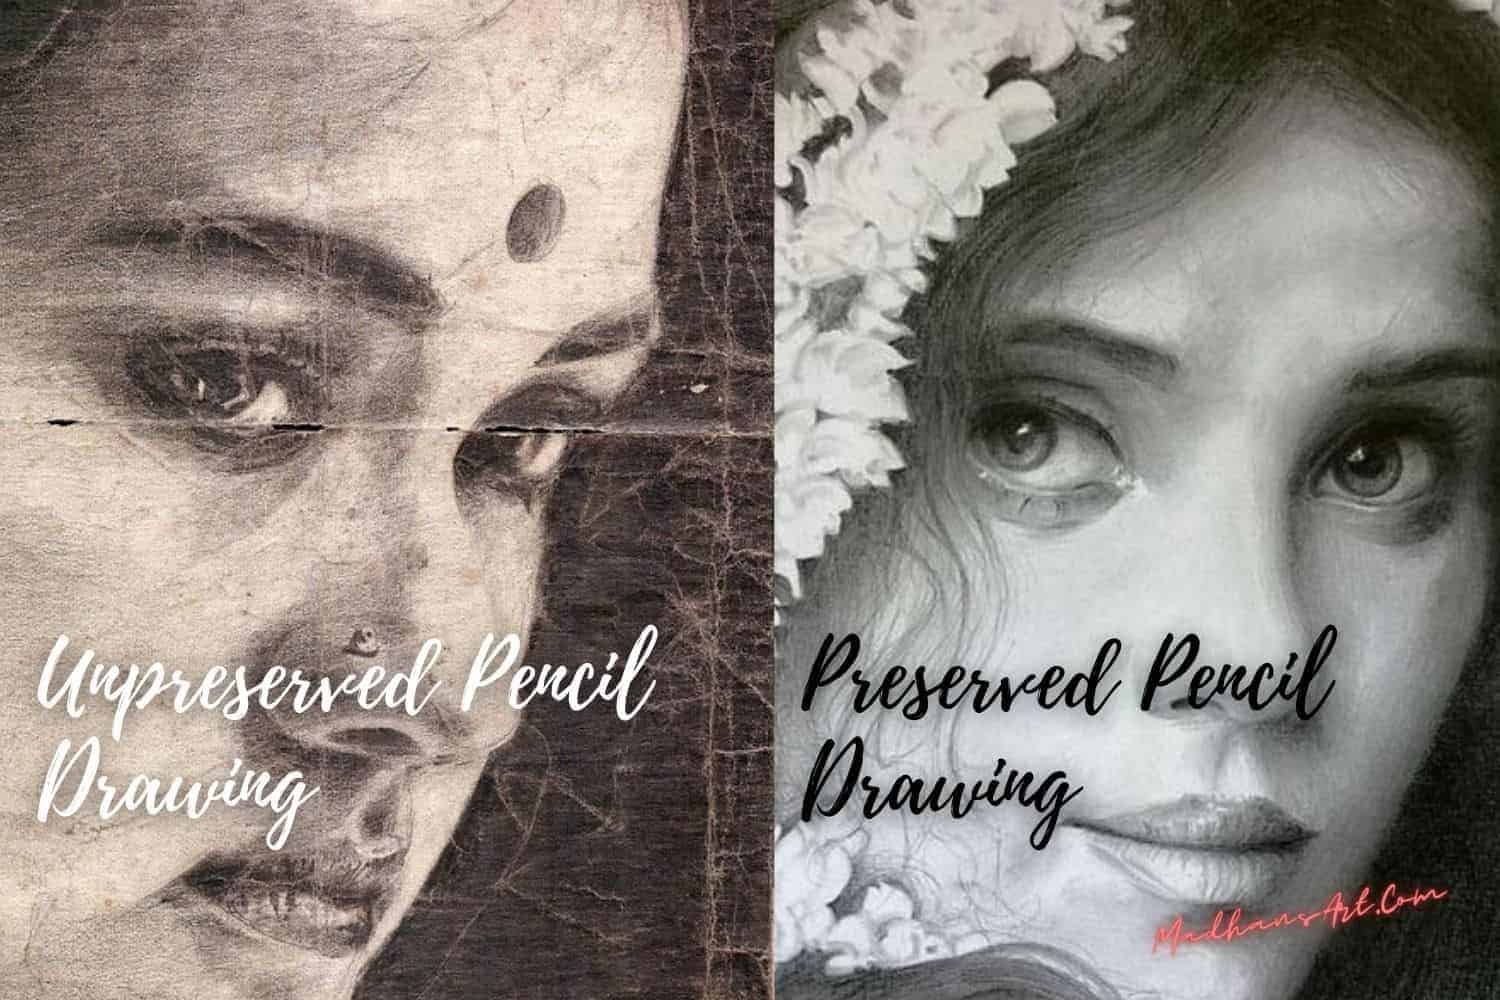 How to Preserve a Pencil Drawing?